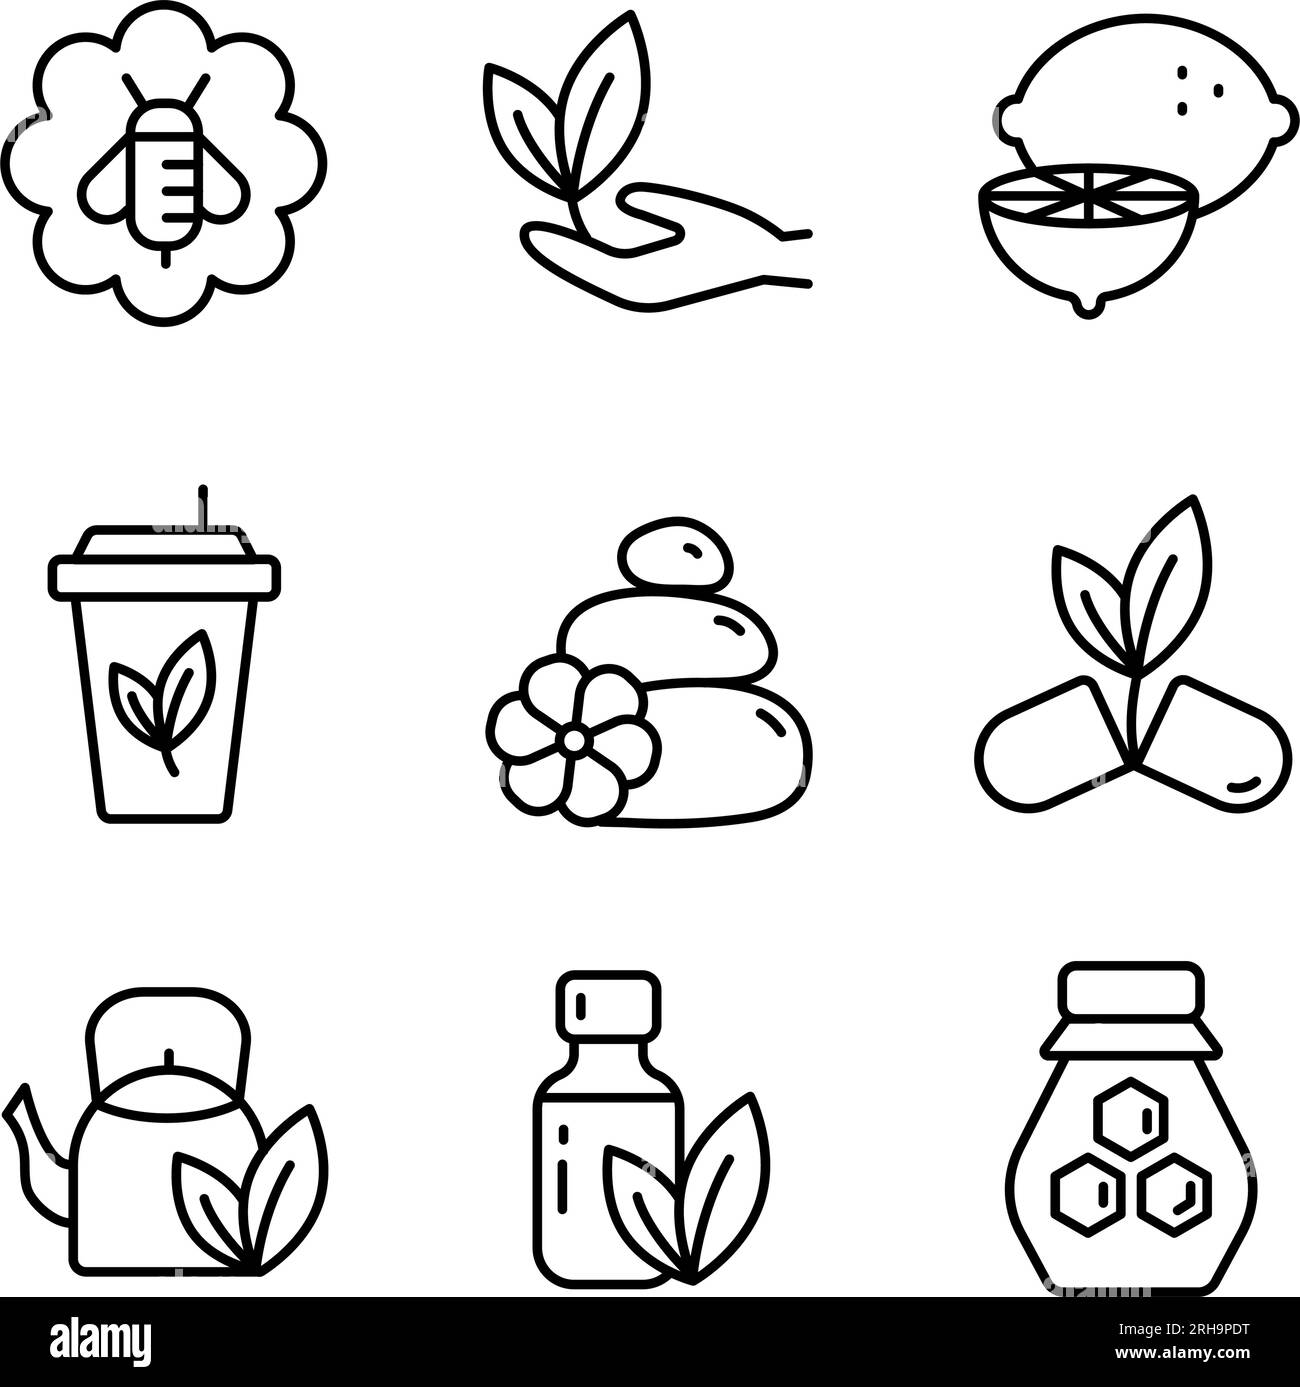 Naturopathy Therapy Vector Line Icons Set. Naturopathy Medication Linear Pictograms. Natural Ingredients, Alternative Medicine Contour Illustrations Stock Vector